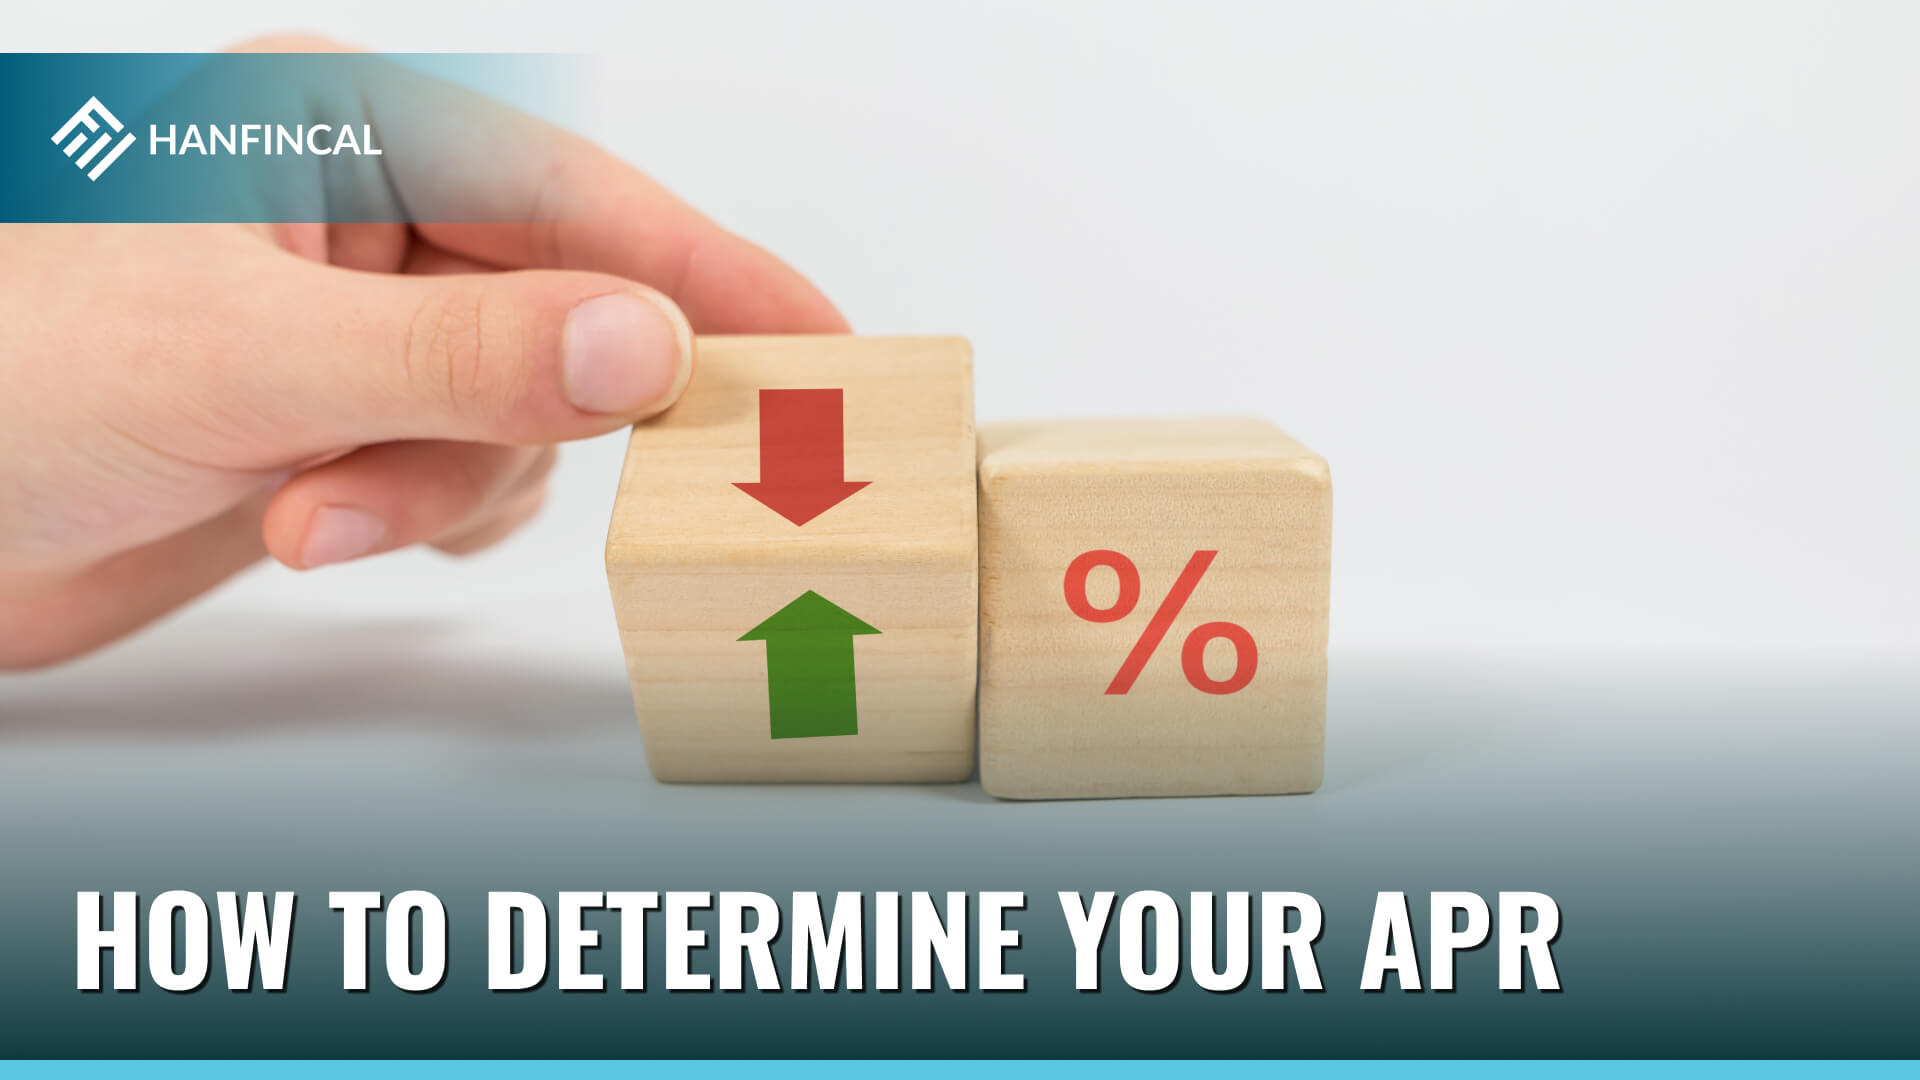 How to determine your APR?